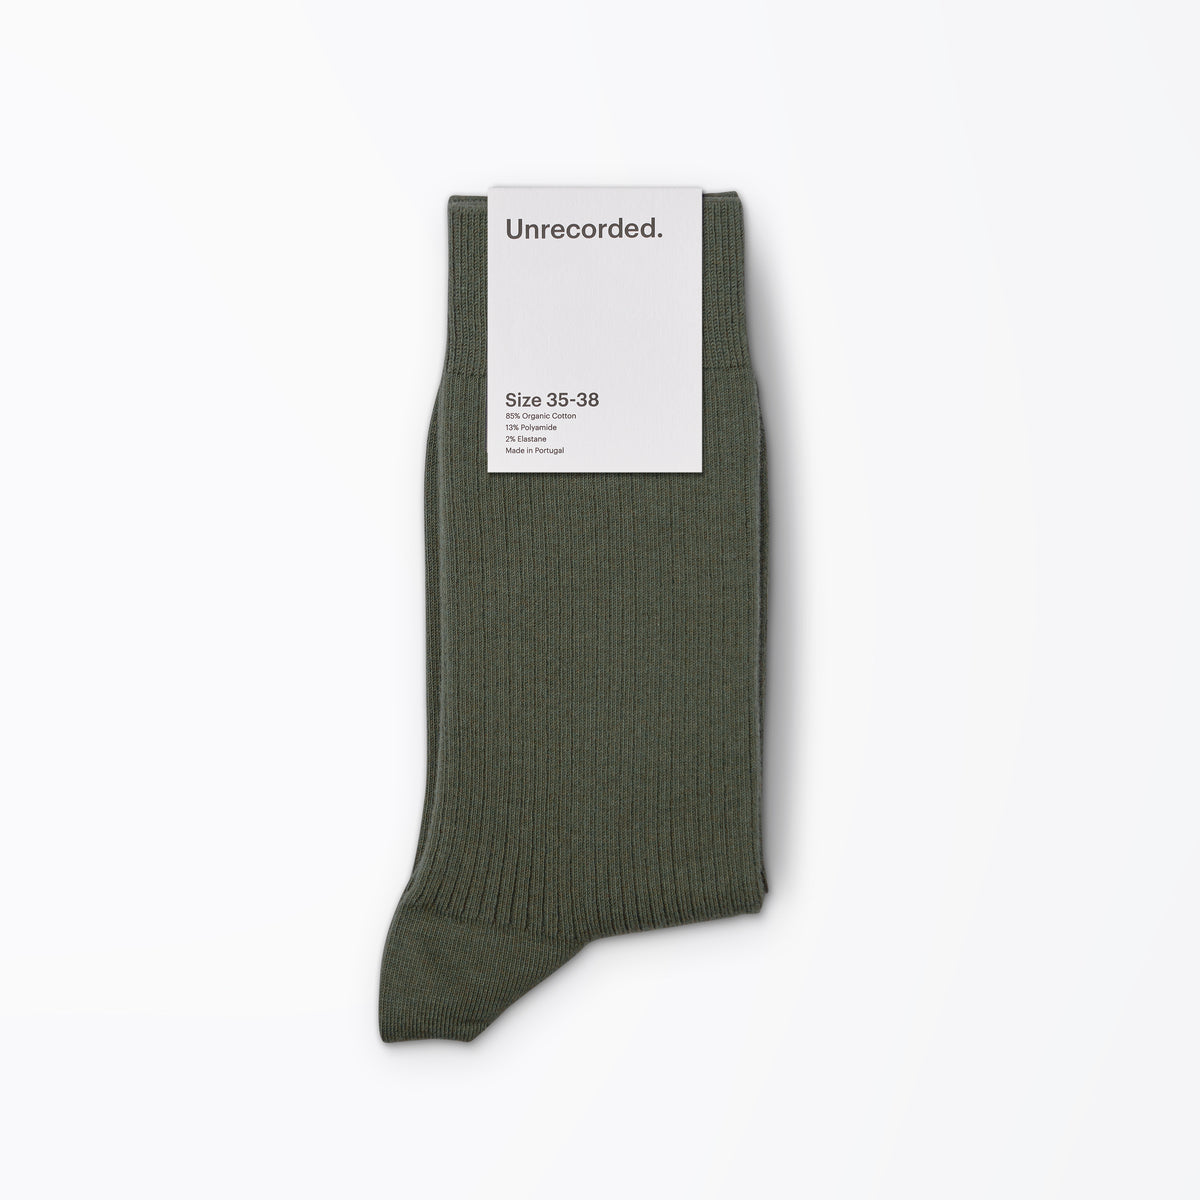 Socks Green knitted in Portugal from an organic cotton blend - Front Women - Front Men